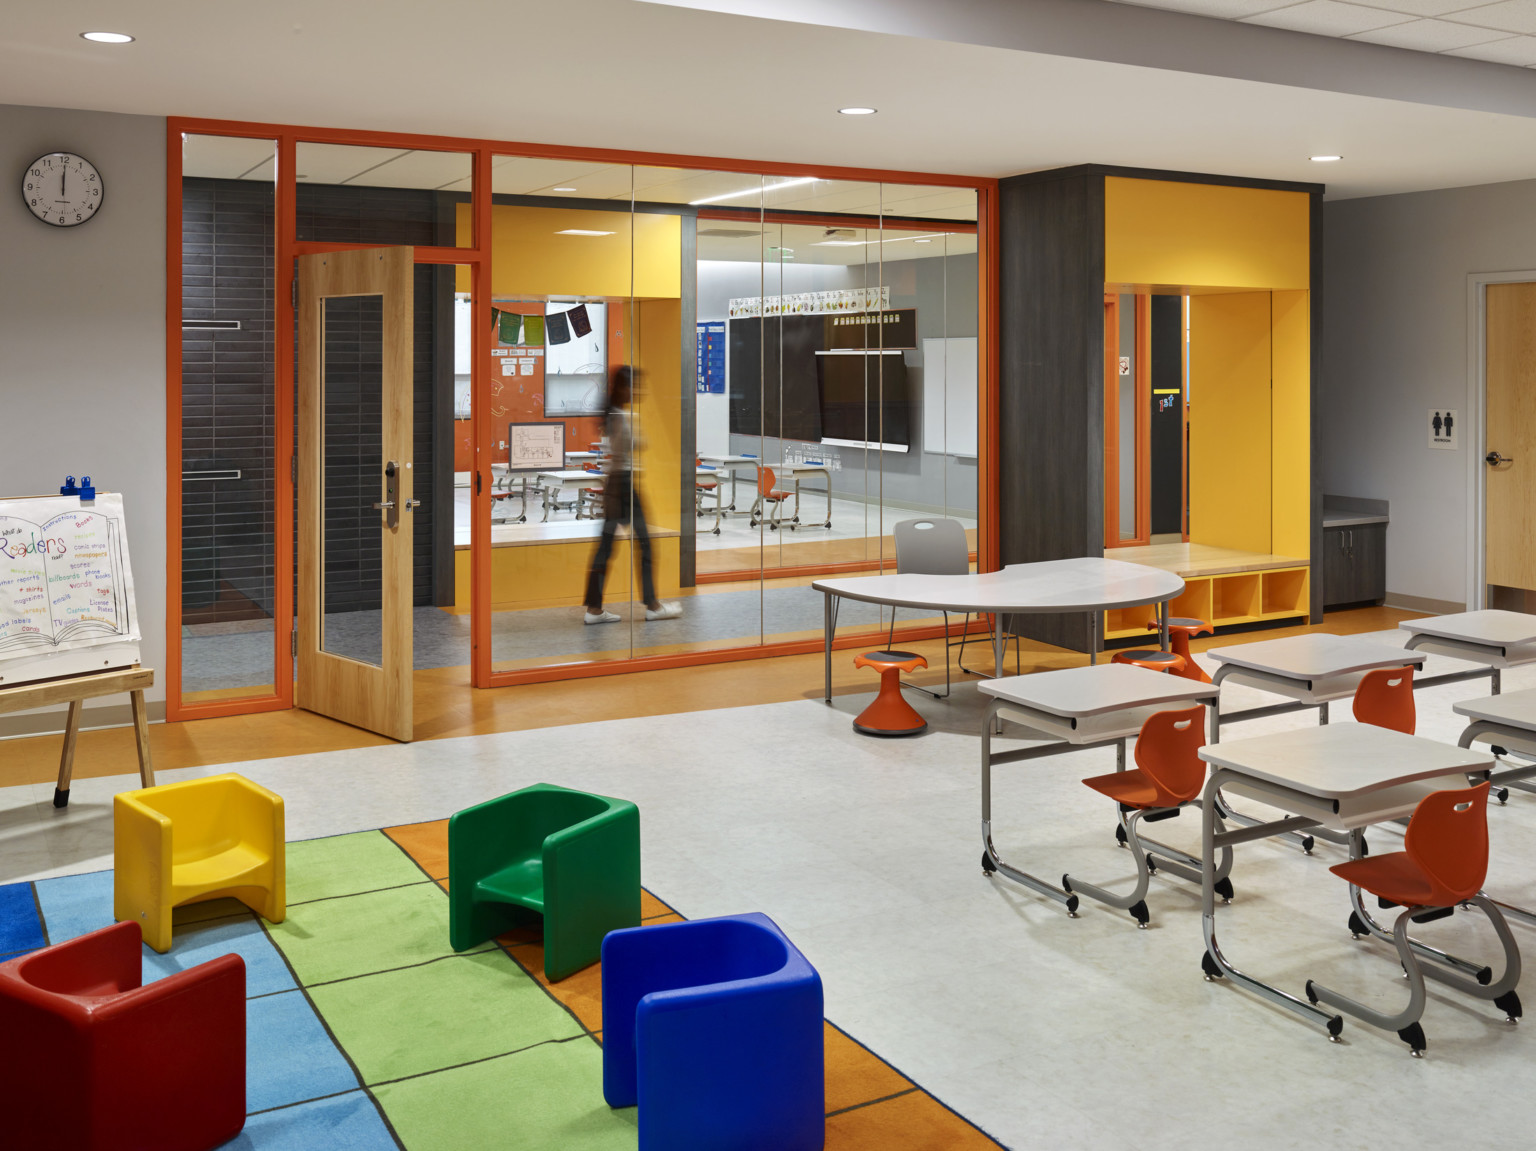 Classroom with glass wall to hallway. Flexible desks face table at front. Stools on padded carpet. Yellow booth with cubbies